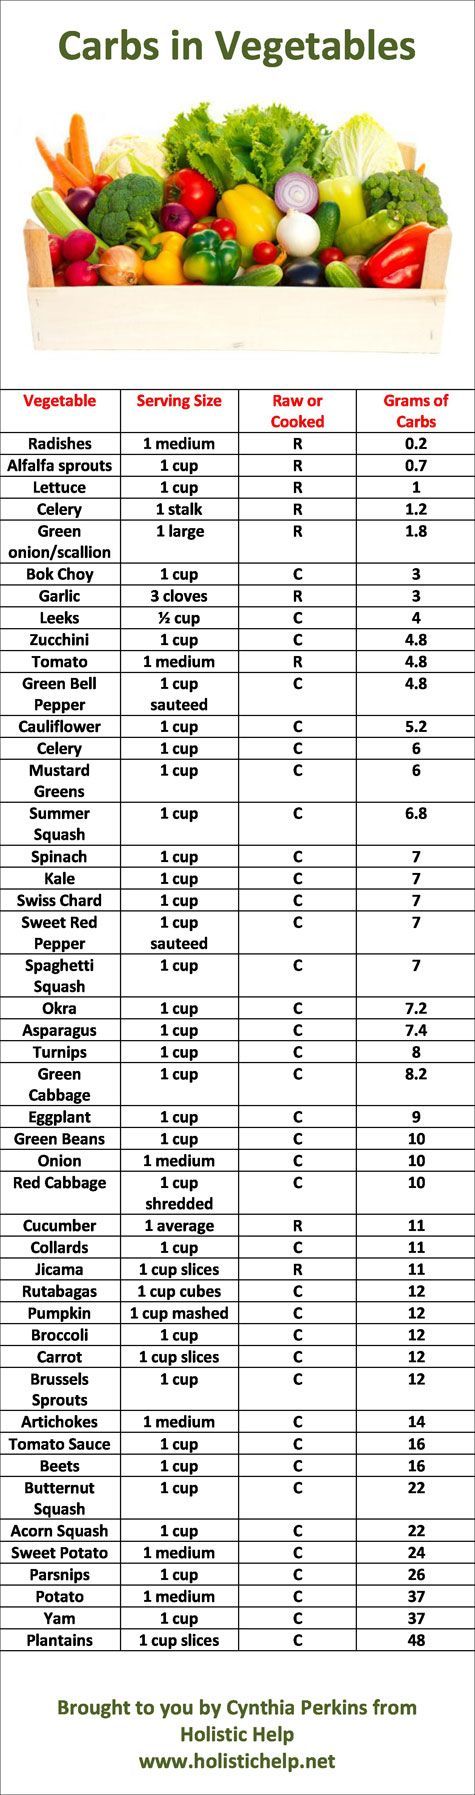 List of Carbs in Vegetables and Printable Chart